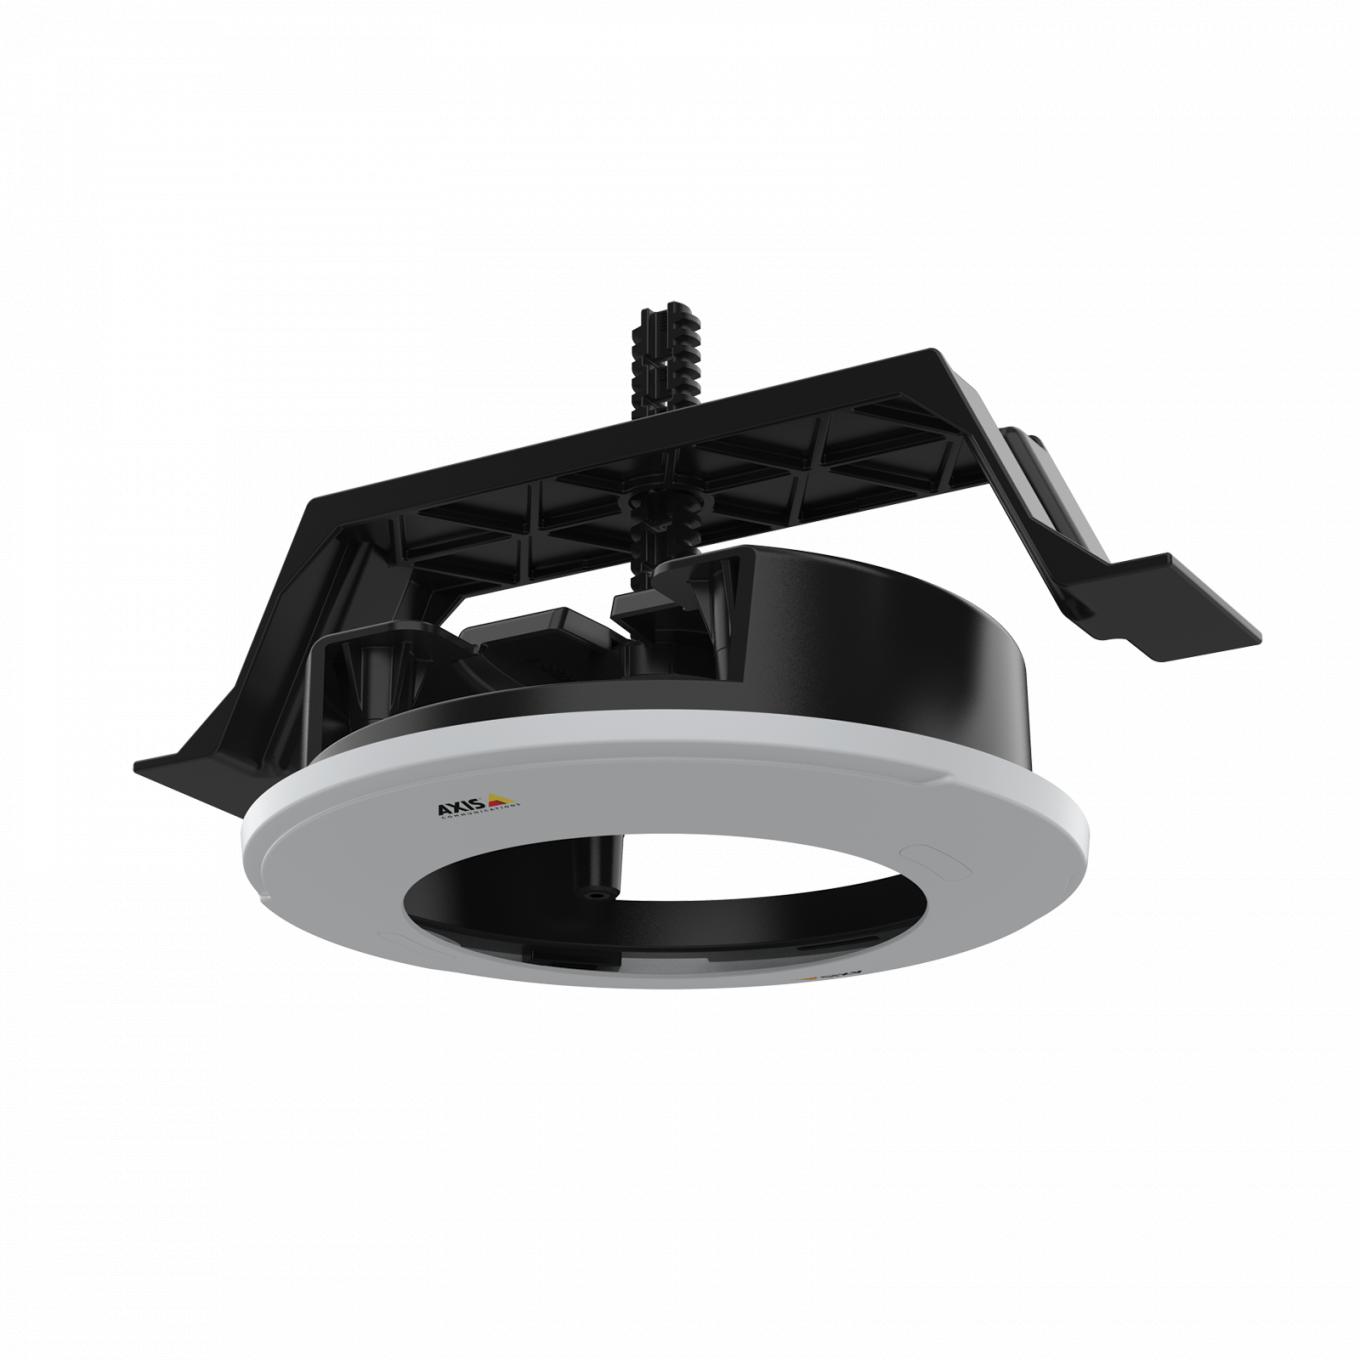 AXIS TM3204 Recessed Mount | Axis Communications